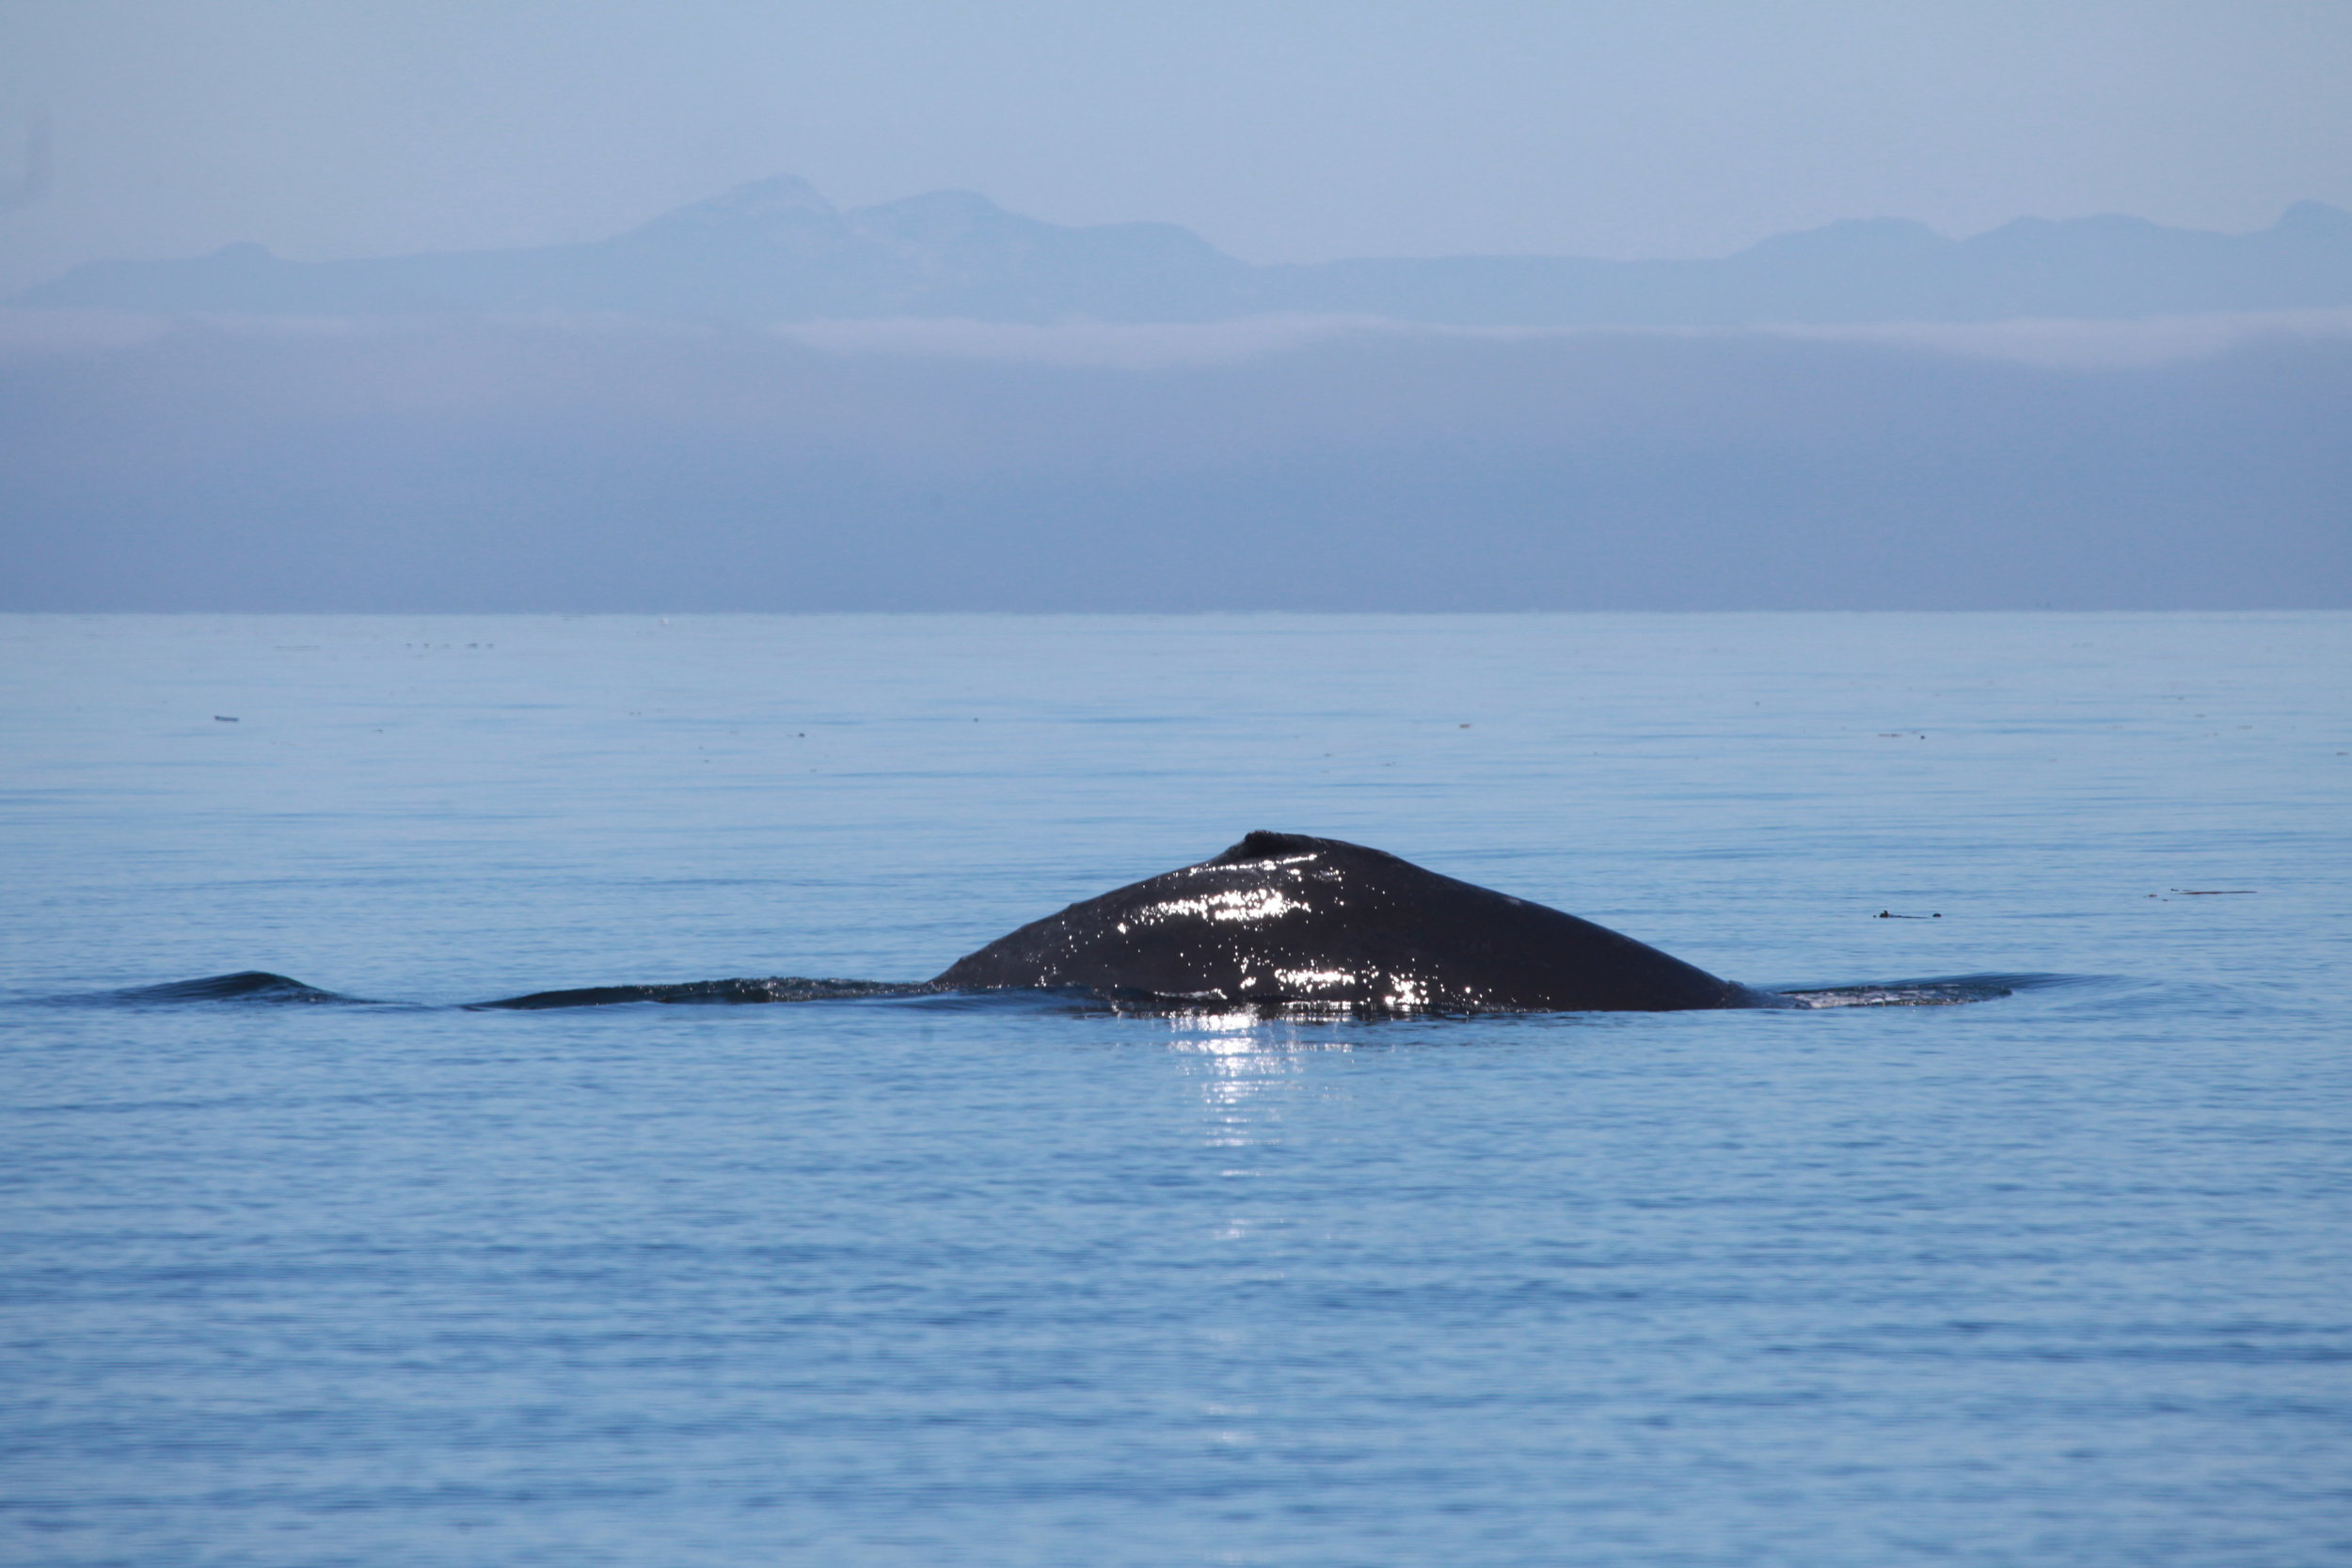 Whale watching in the Queen Charlotte Strait today.